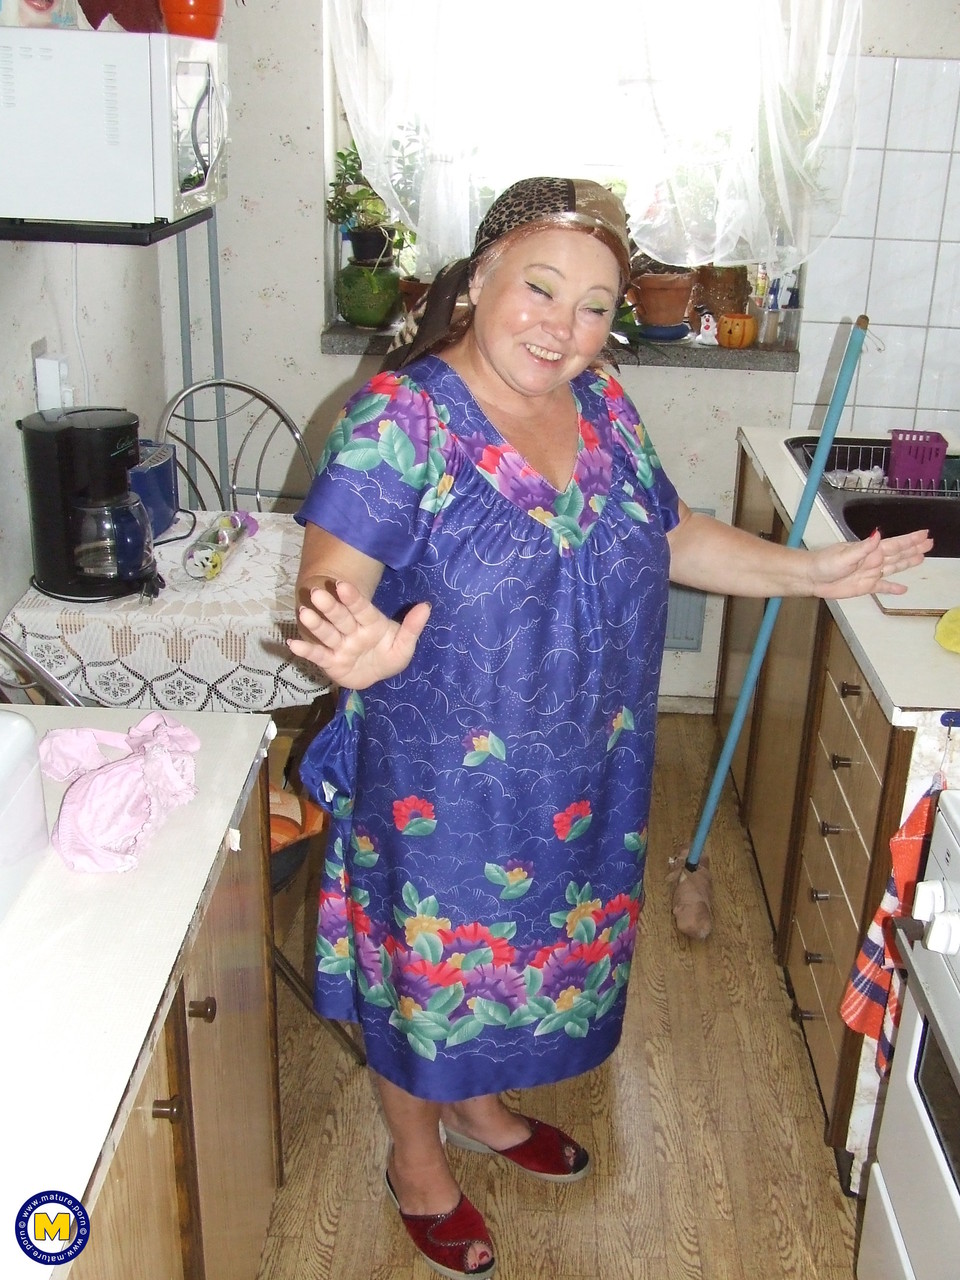 Fat granny Regina strips her clothes and poses while cleaning the kitchen 色情照片 #425872107 | Mature NL Pics, Regina, Mature, 手机色情